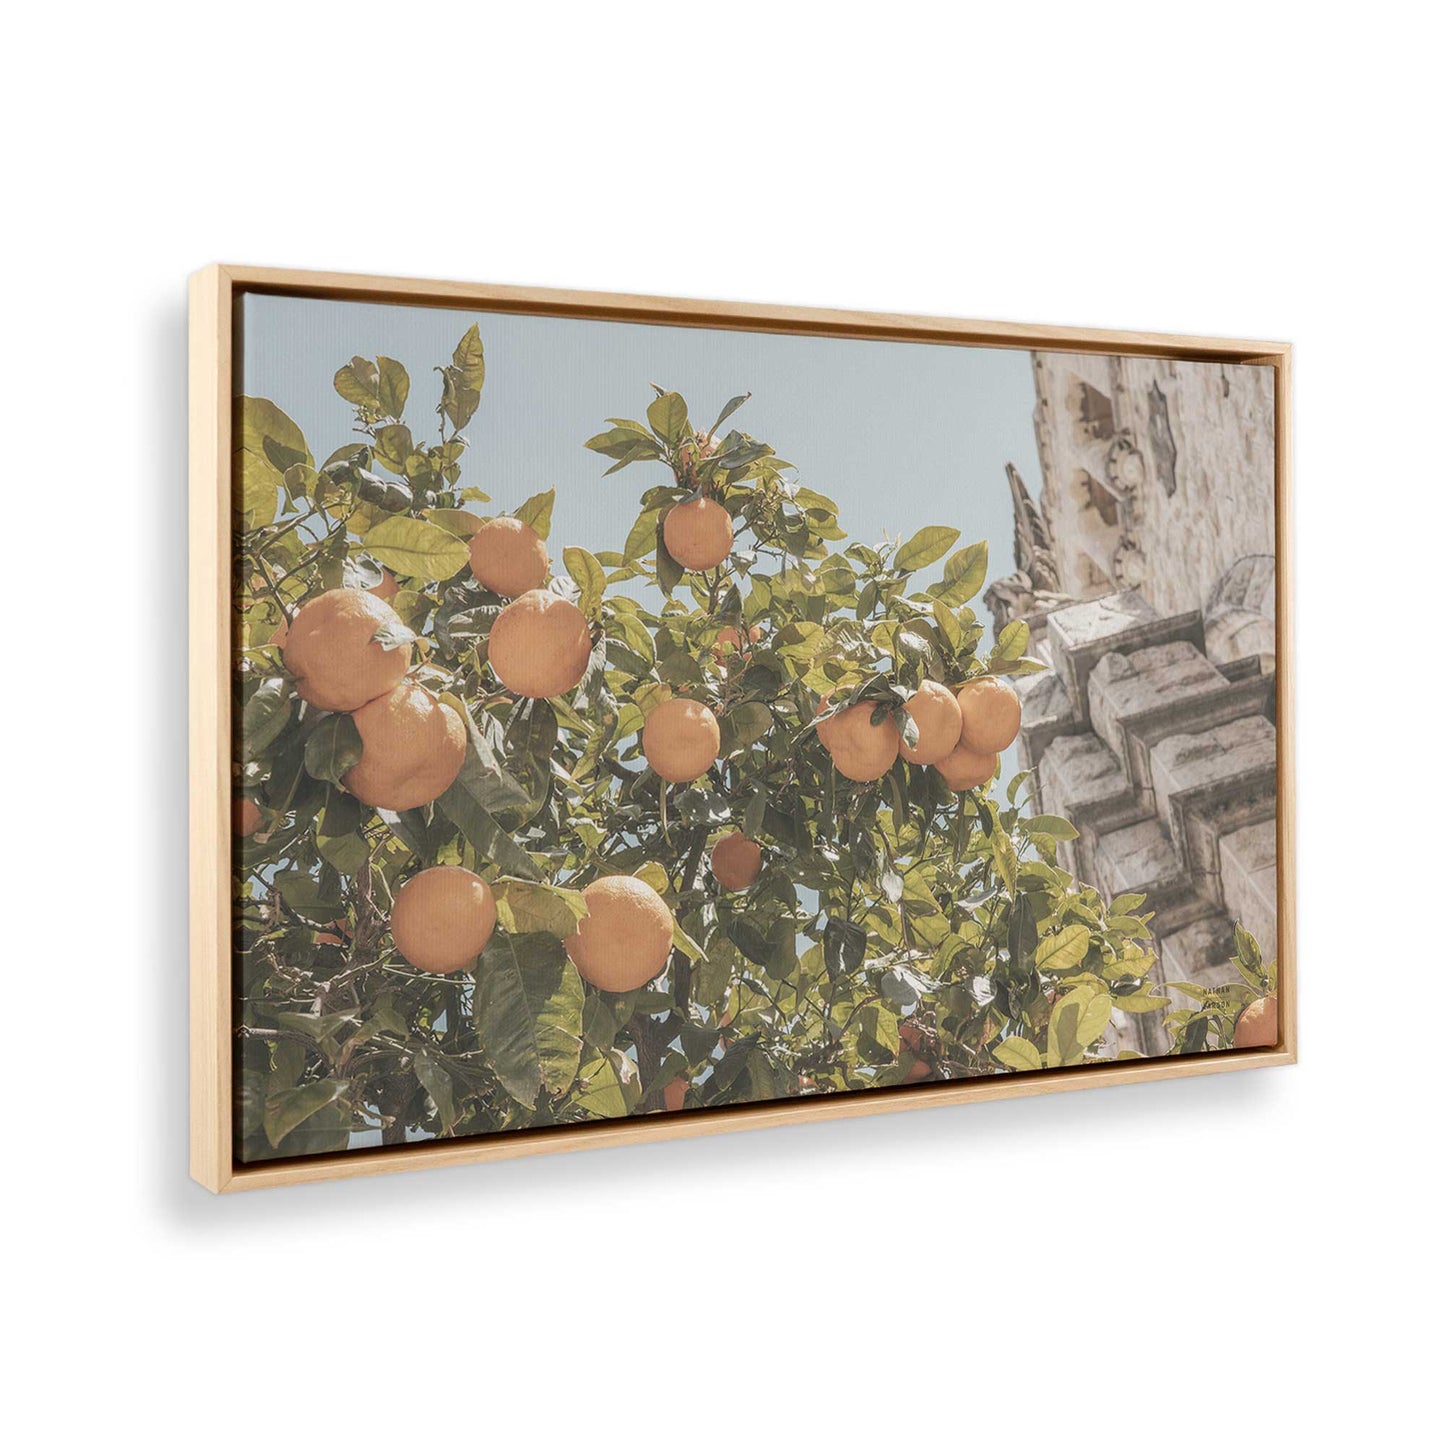 [Color:American Maple] Picture of art in a American Maple frame at an angle